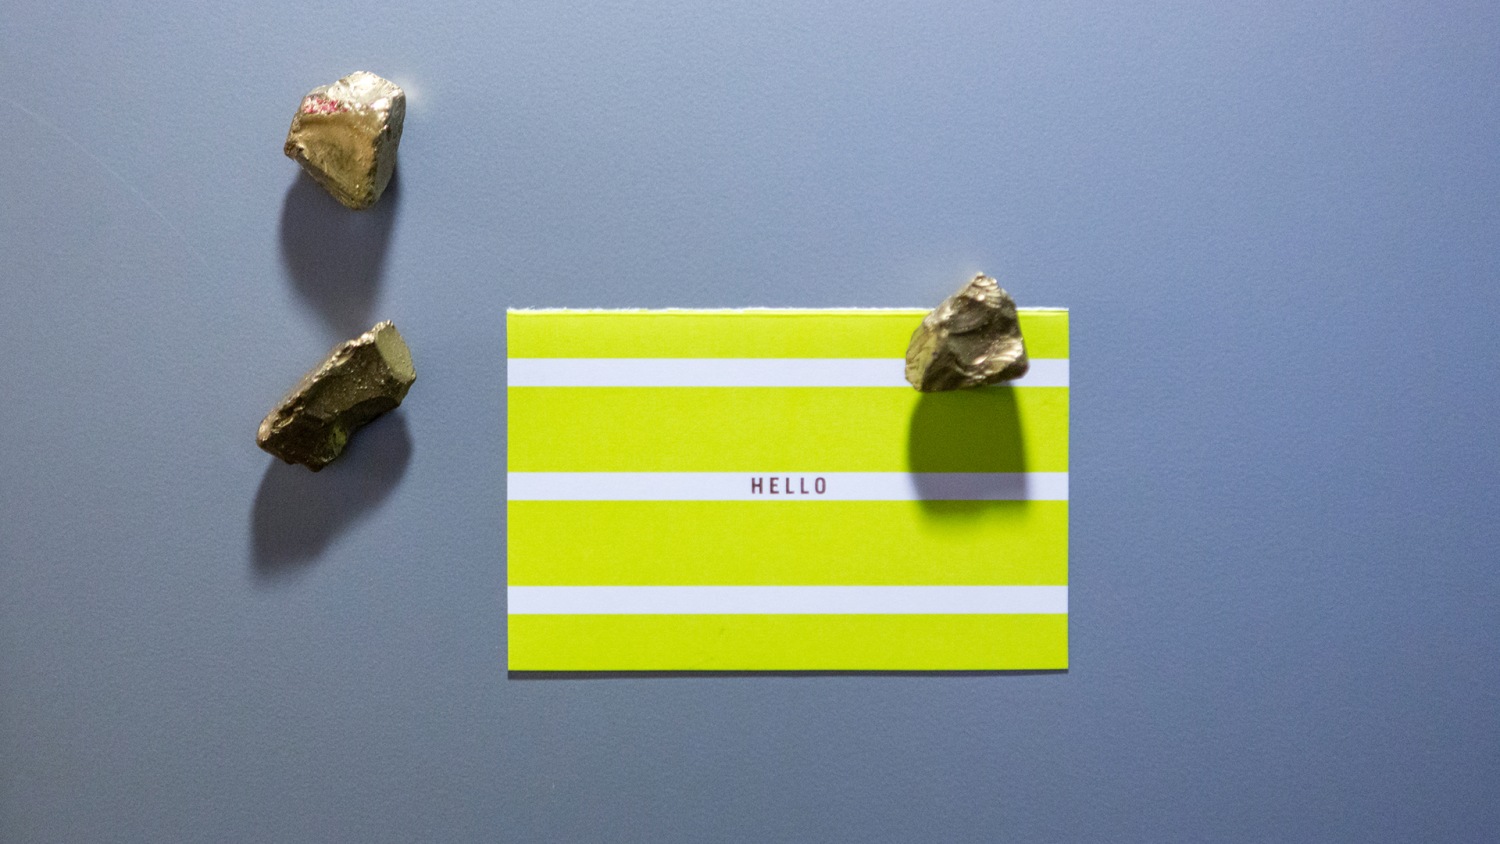 DIY gold magnets: How to make them in 2 minutes